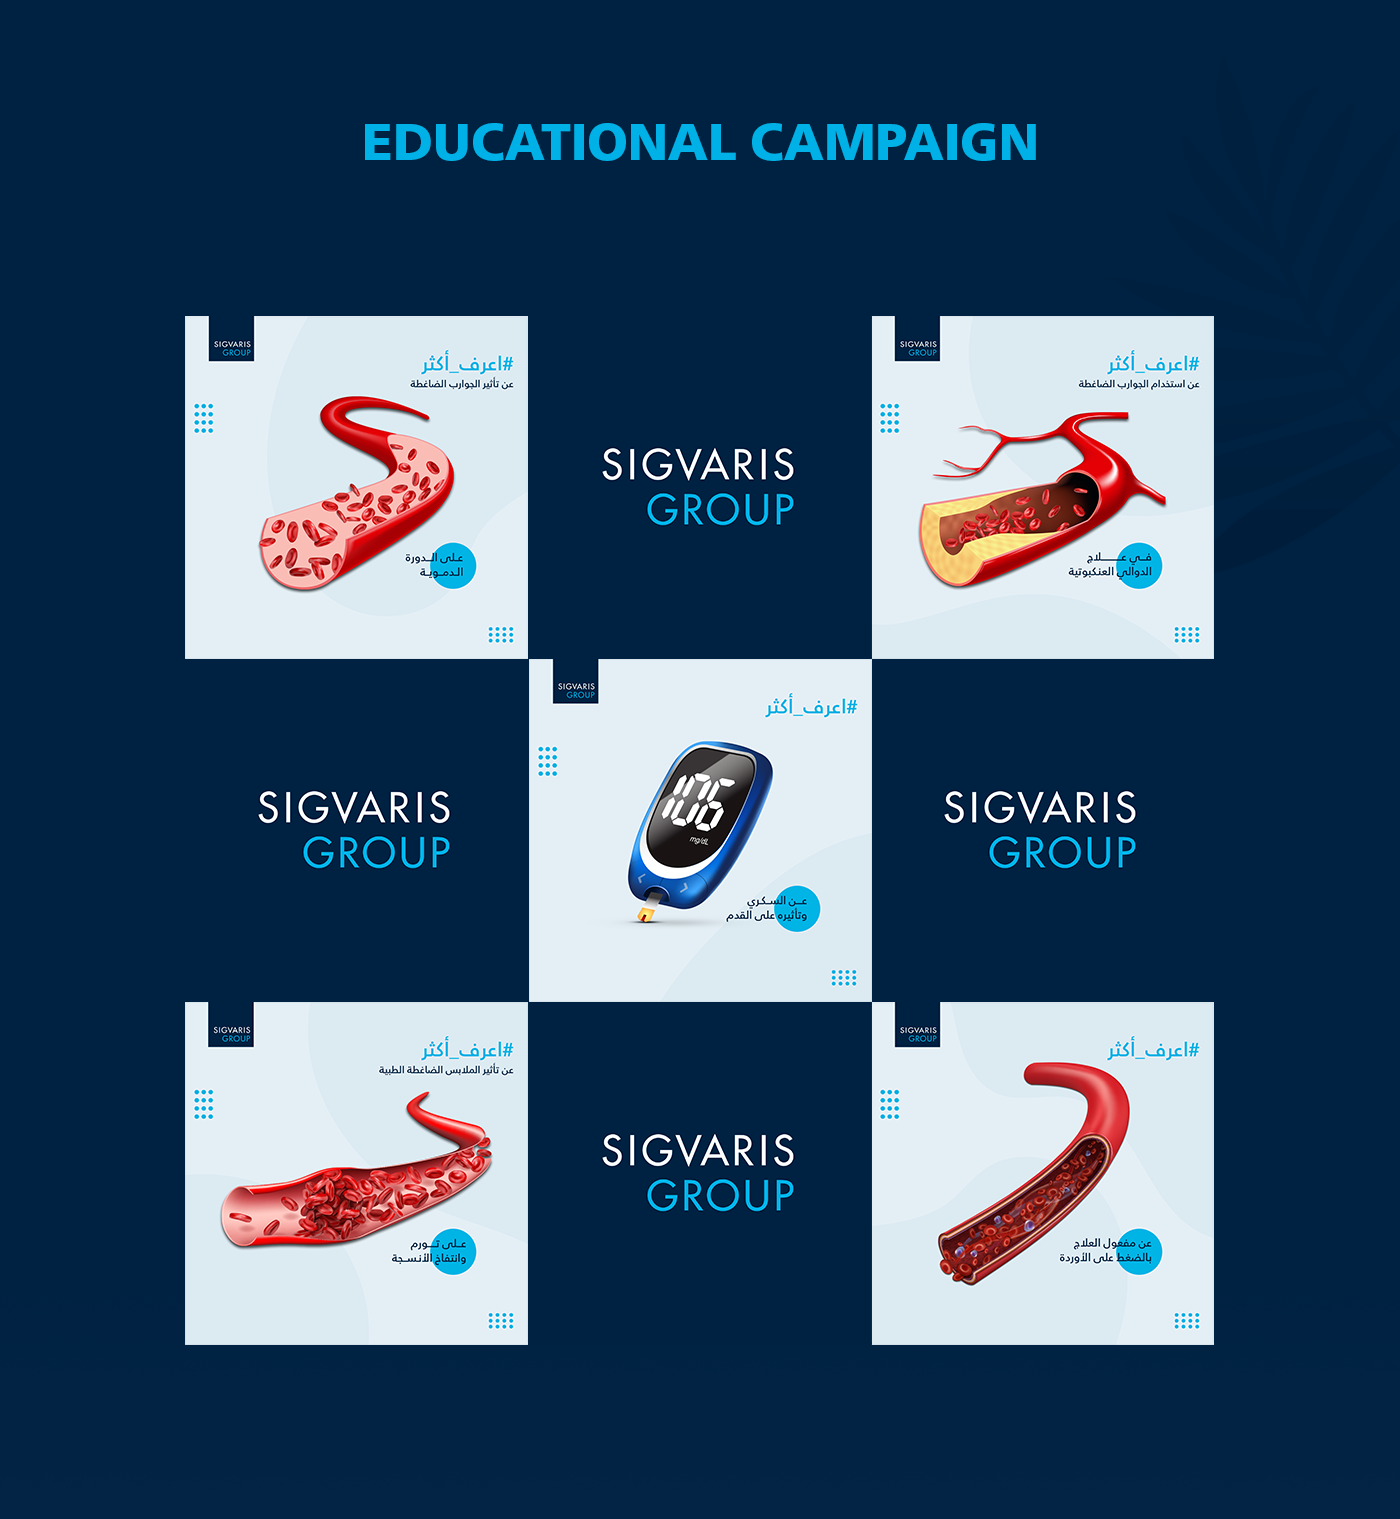 Sigvaris campaign medical Health summer product concept visual online hub